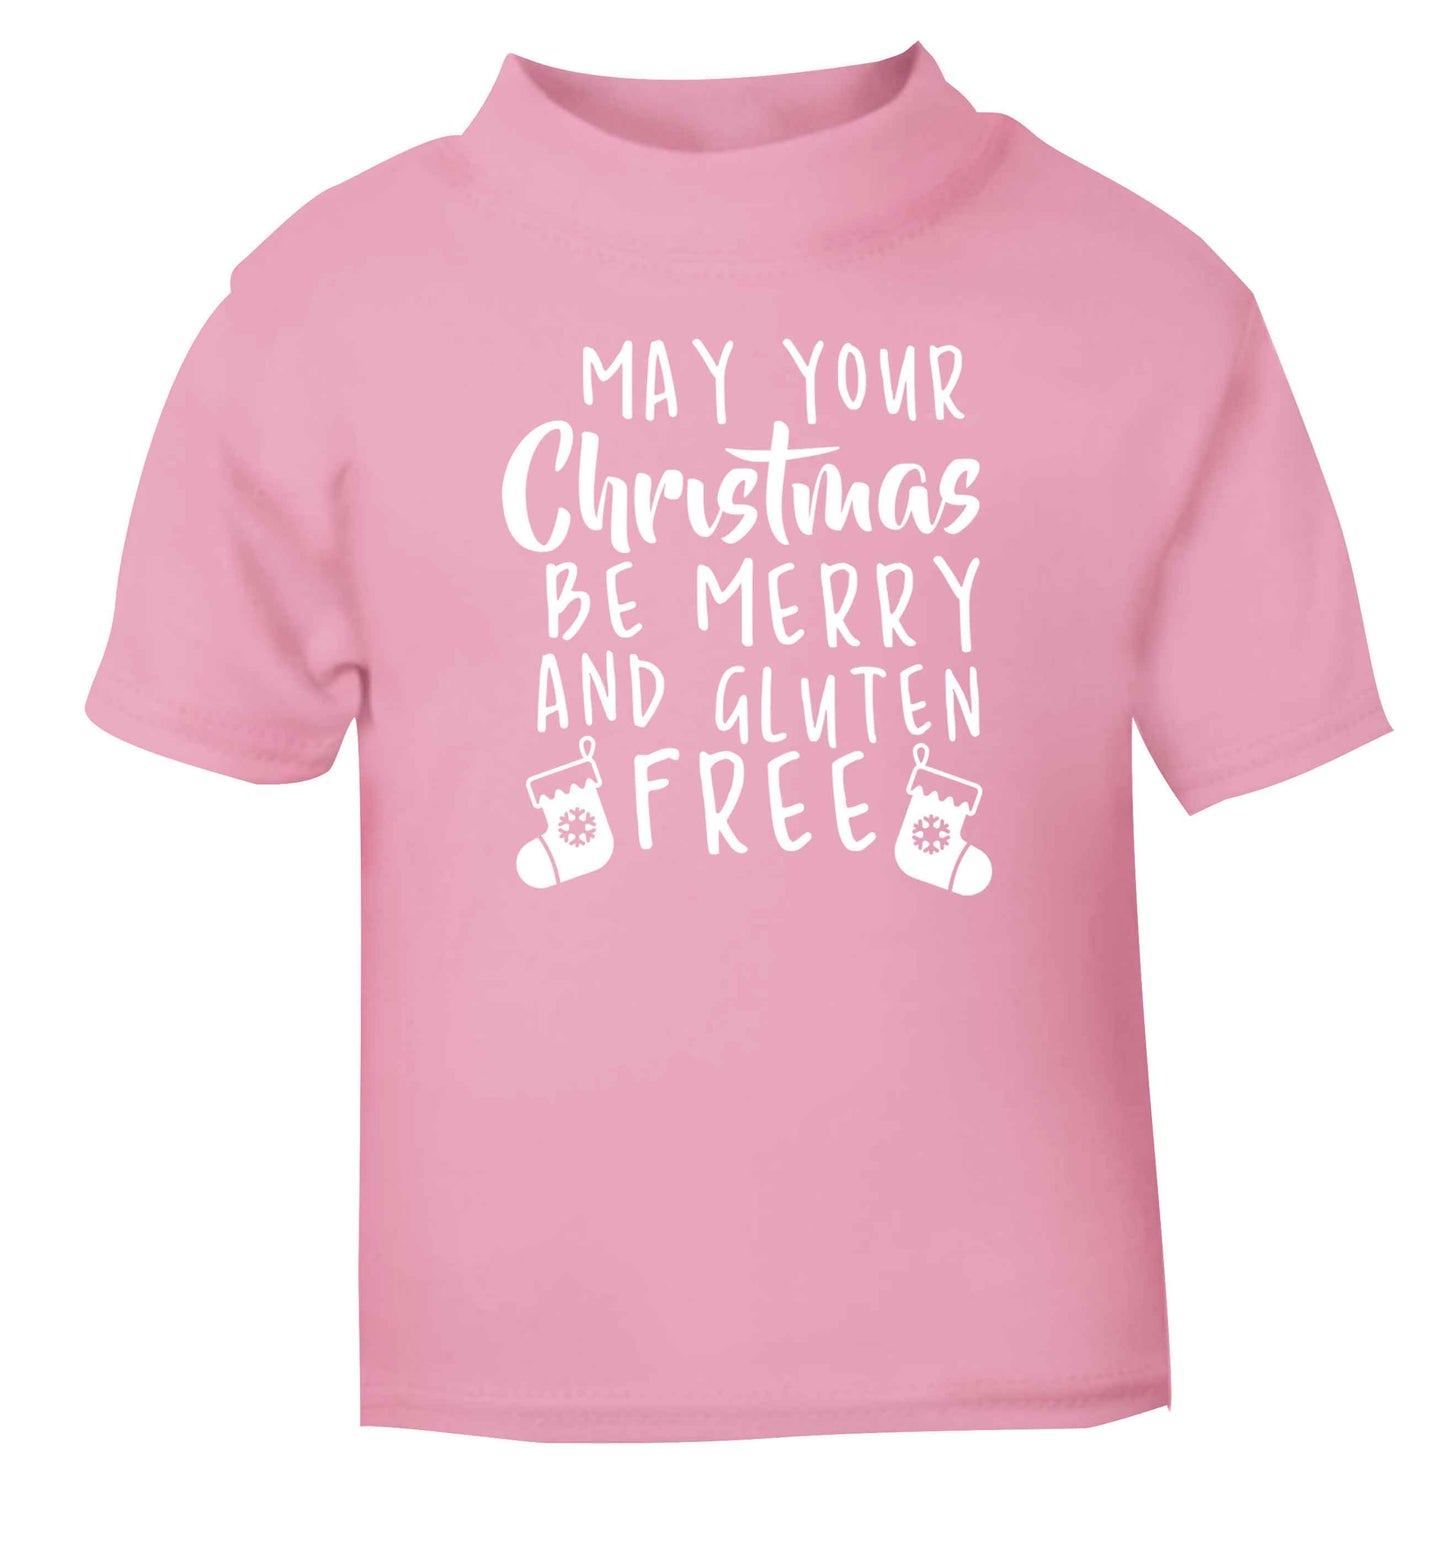 May your Christmas be merry and gluten free light pink Baby Toddler Tshirt 2 Years